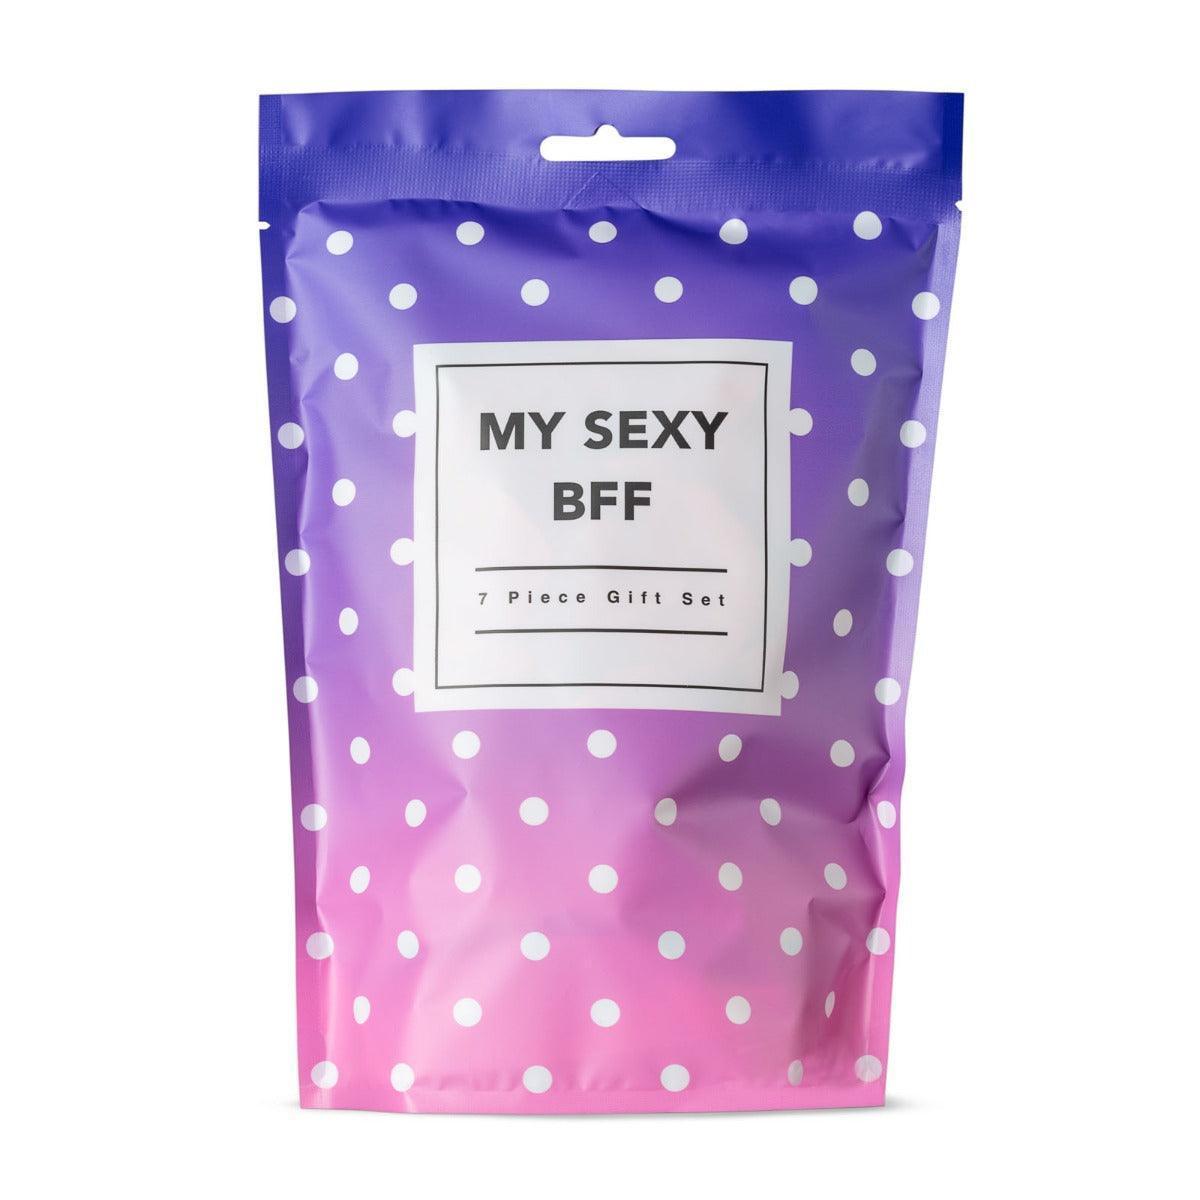 Loveboxxx - My Sexy BFF Couples Sex Toy Gift Set